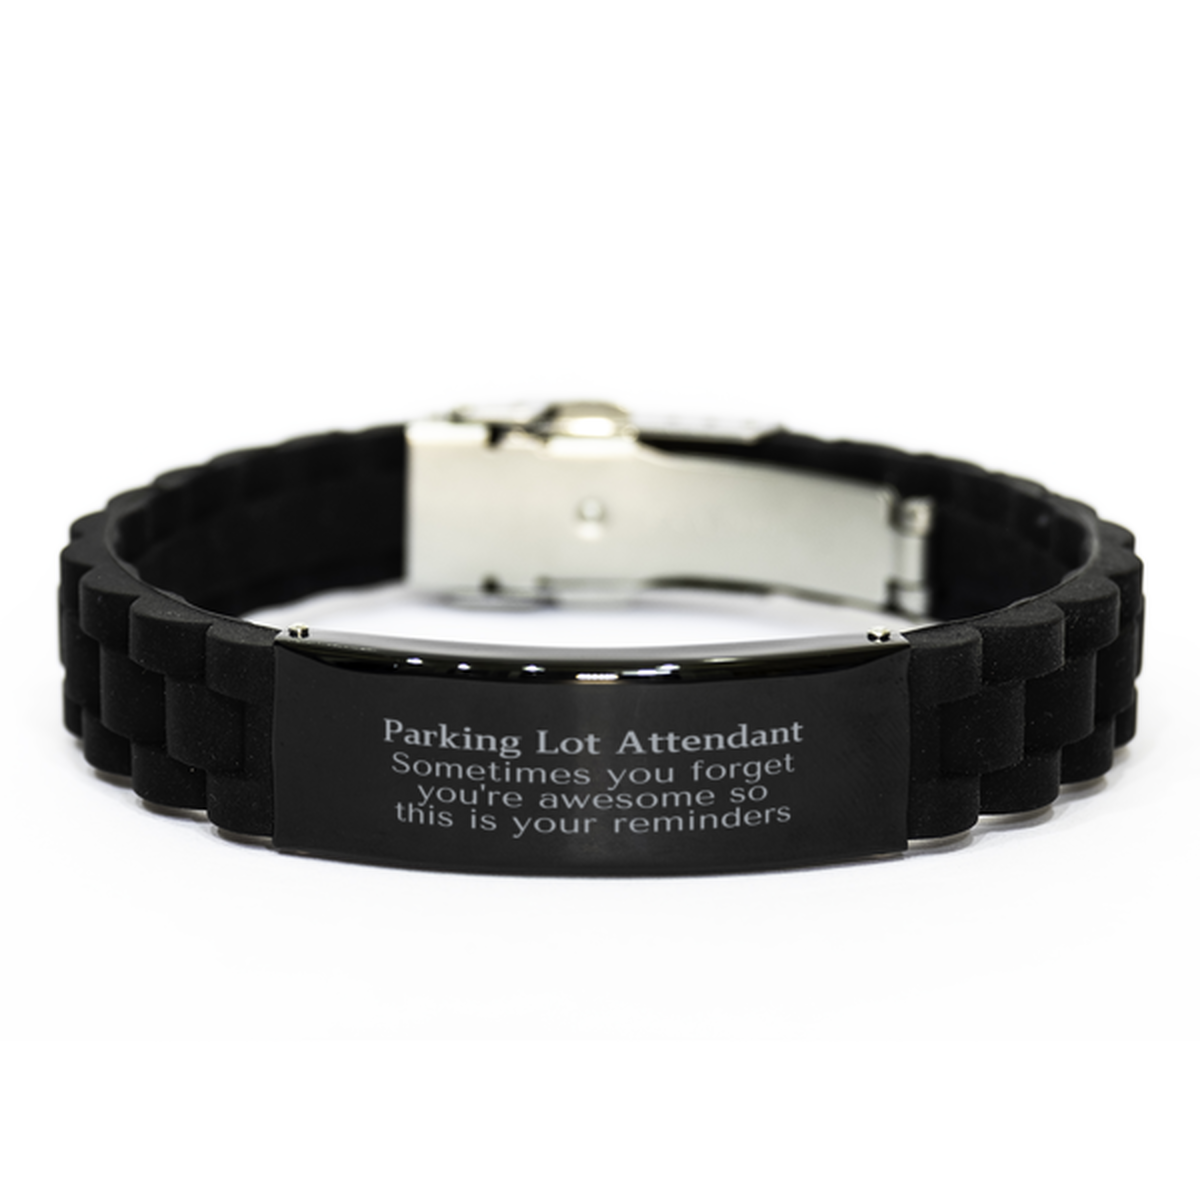 Sentimental Parking Lot Attendant Black Glidelock Clasp Bracelet, Parking Lot Attendant Sometimes you forget you're awesome so this is your reminders, Graduation Christmas Birthday Gifts for Parking Lot Attendant, Men, Women, Coworkers